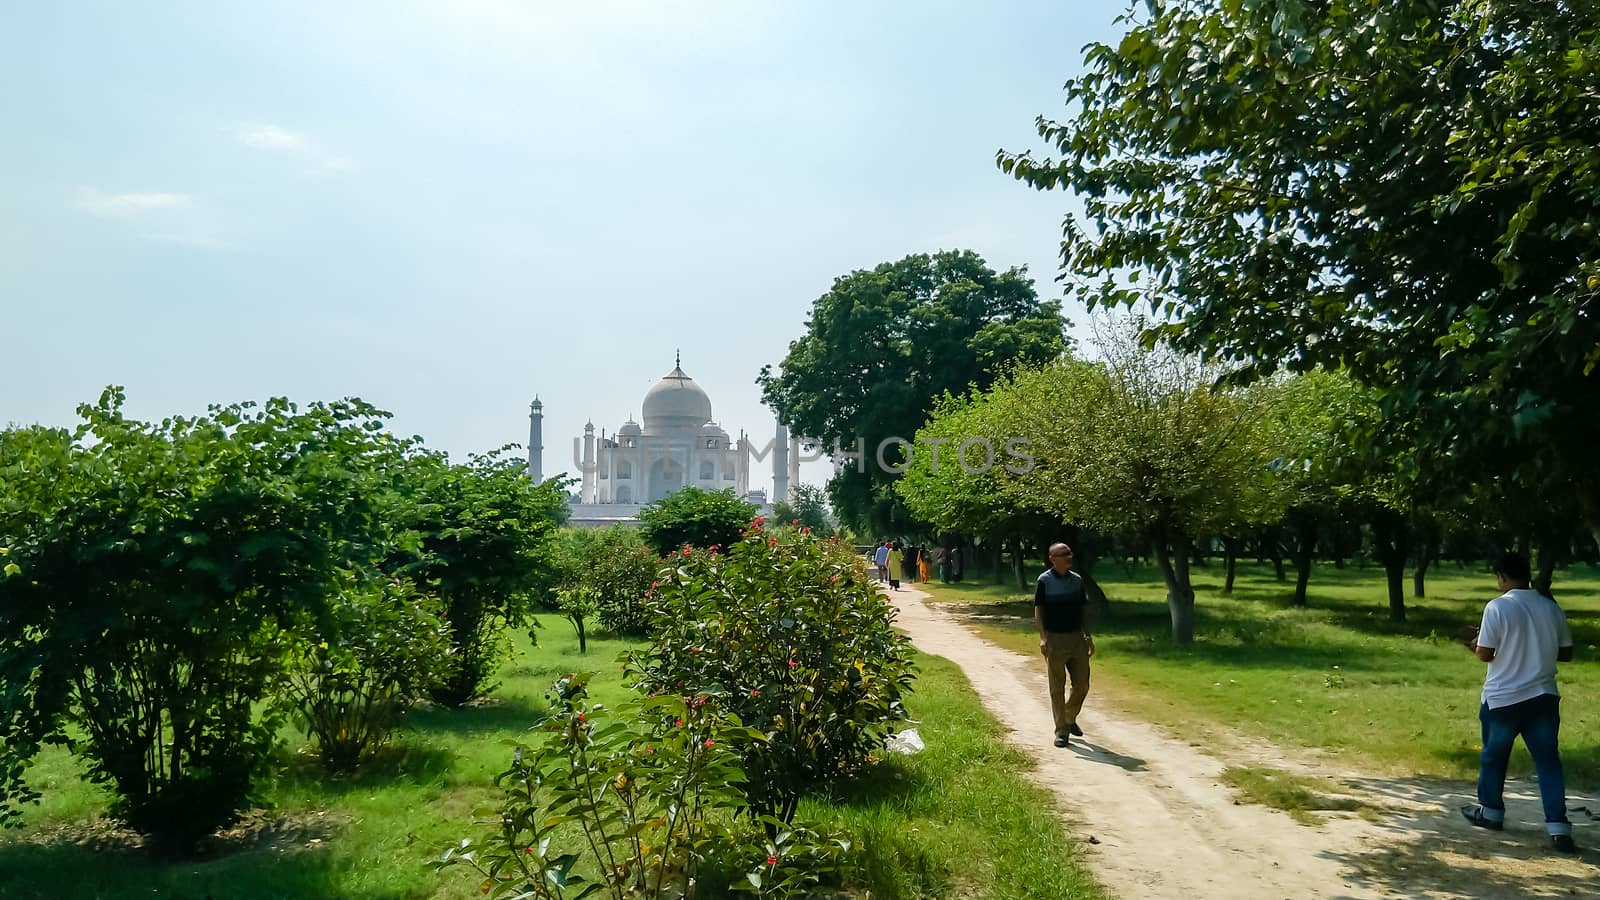 The Taj Mahal seven wonders of the world. A different view of Taj Maha from far distant with lush greeneries in front. Photography from Agra Fort, South Asia Pac India. August 15 2019